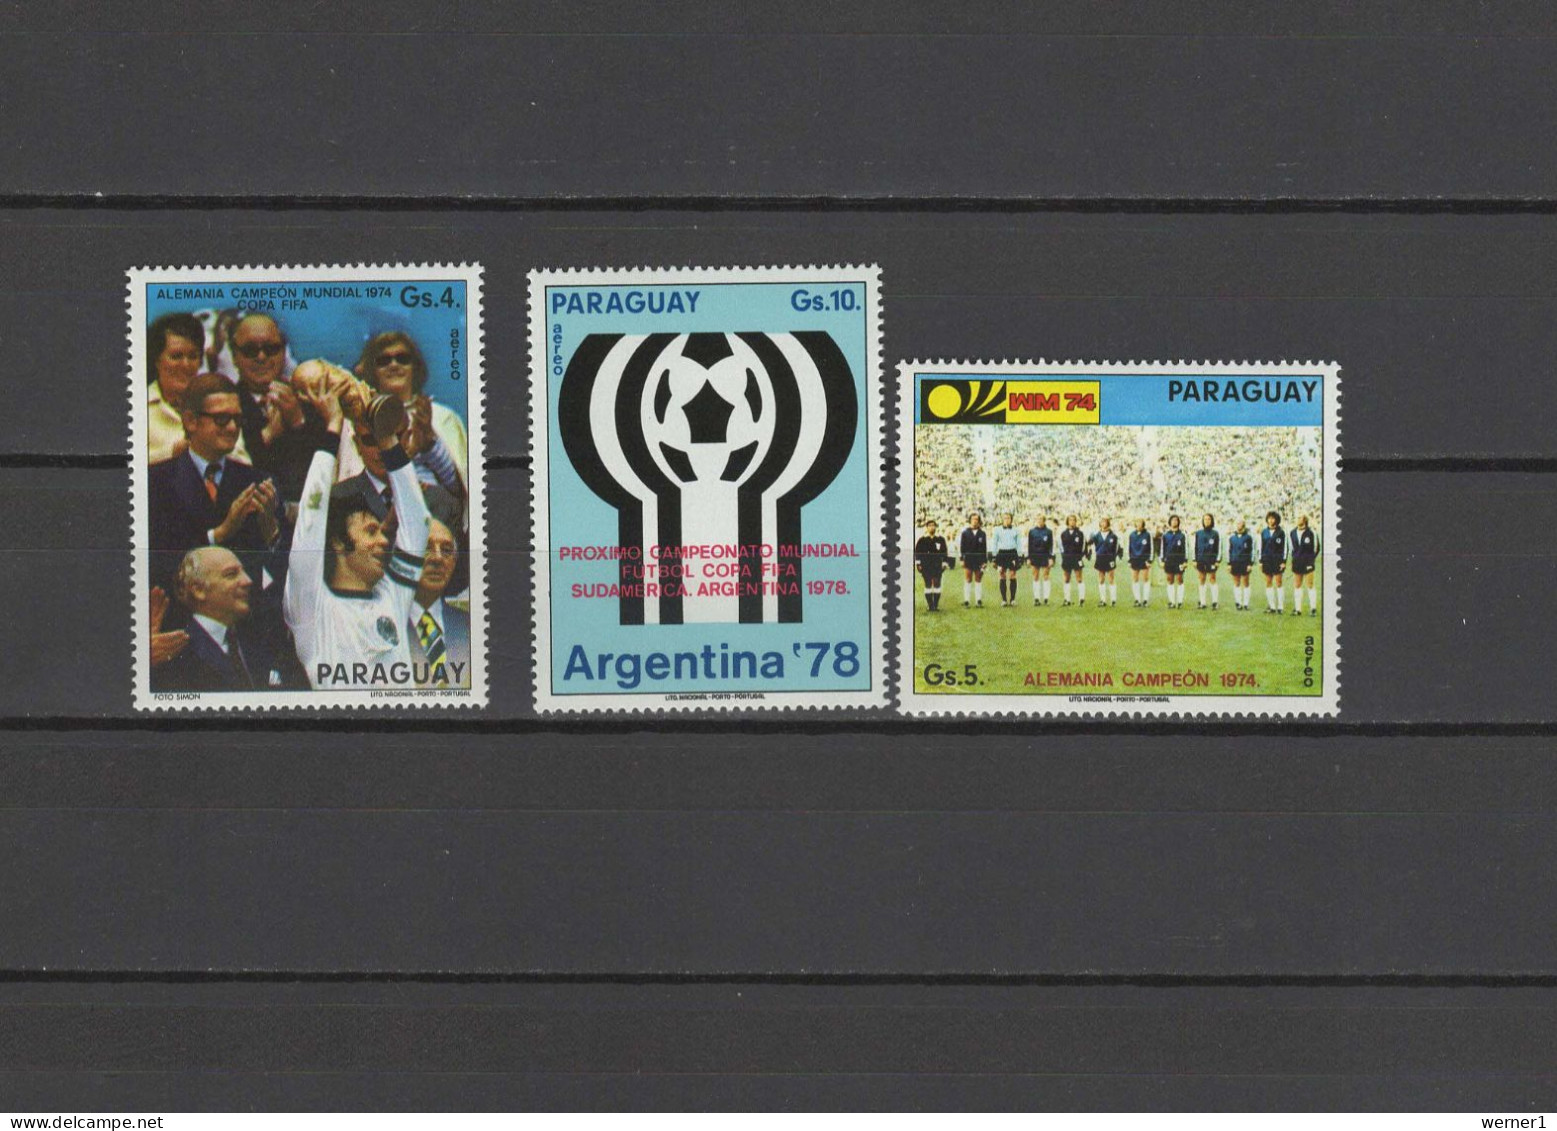 Paraguay 1974 Football Soccer World Cup Set Of 3 MNH - 1974 – West Germany